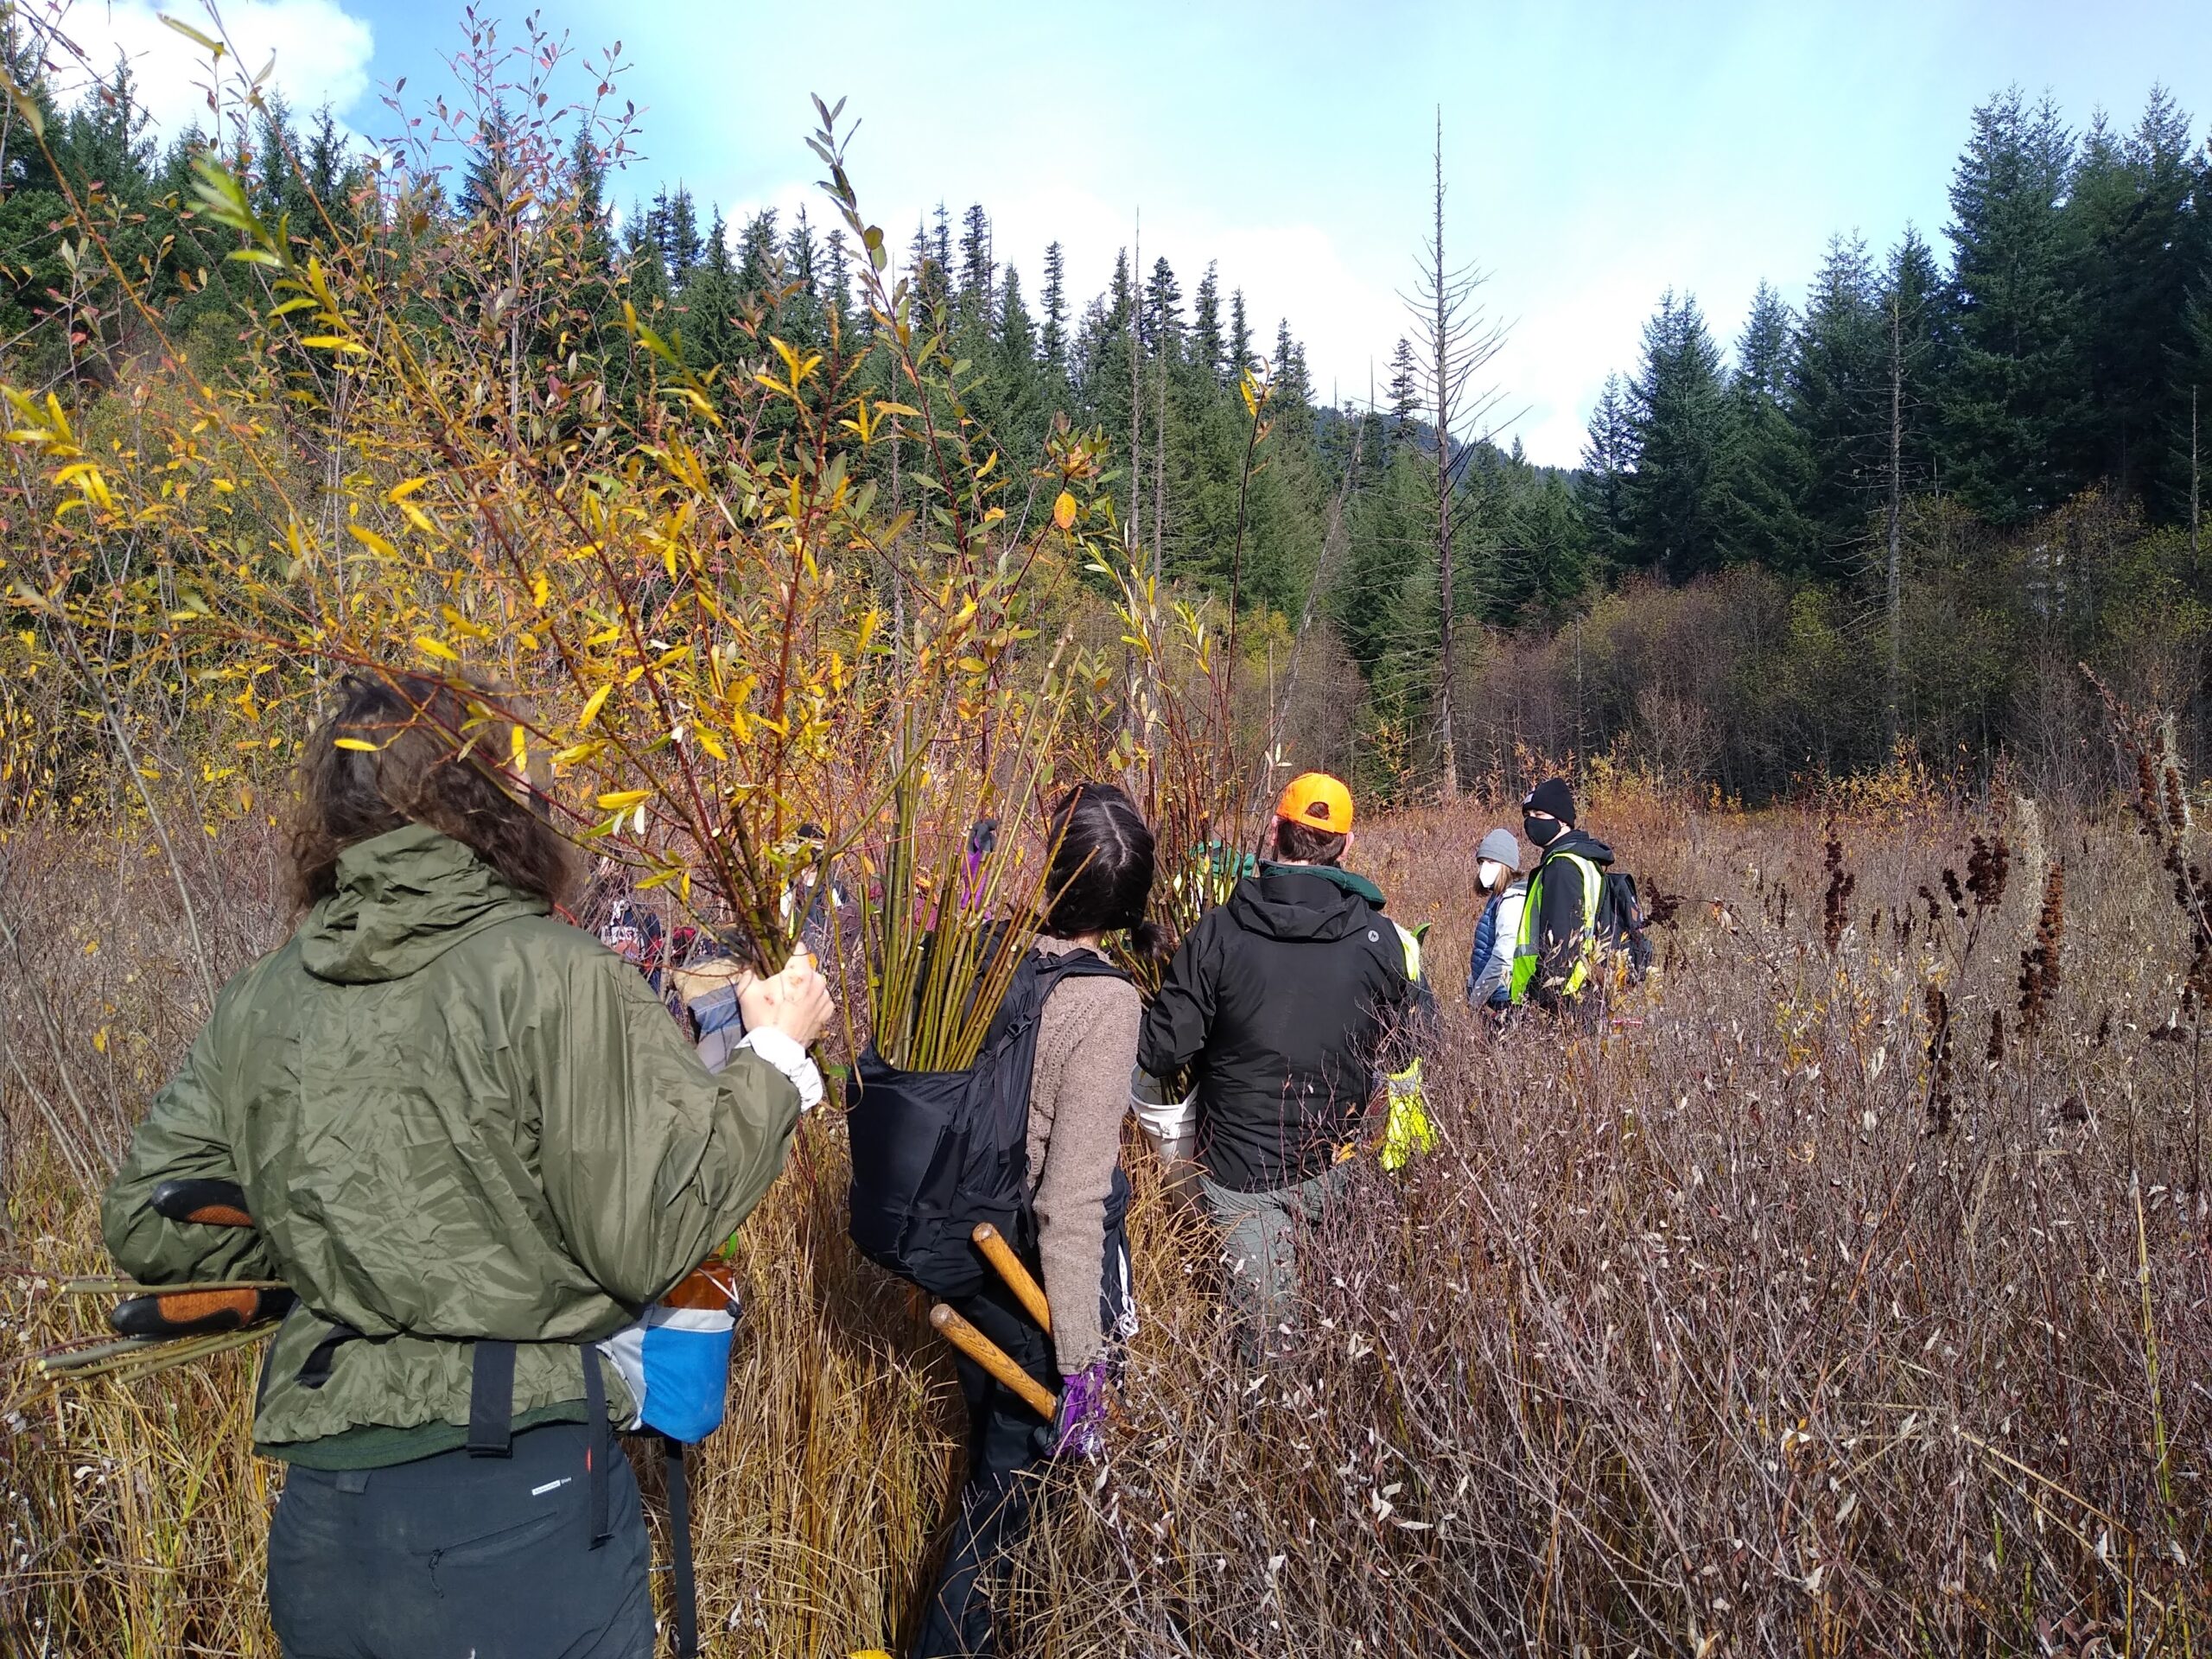 Volunteers form a line in a wetland with the goal of transplanting willow stakes around Sam Creek and the surrounding area to restore the environment for beaver’s return. Several have tools at their belt and have their hands full with bundles of ethically-harvested willow branches, 2021